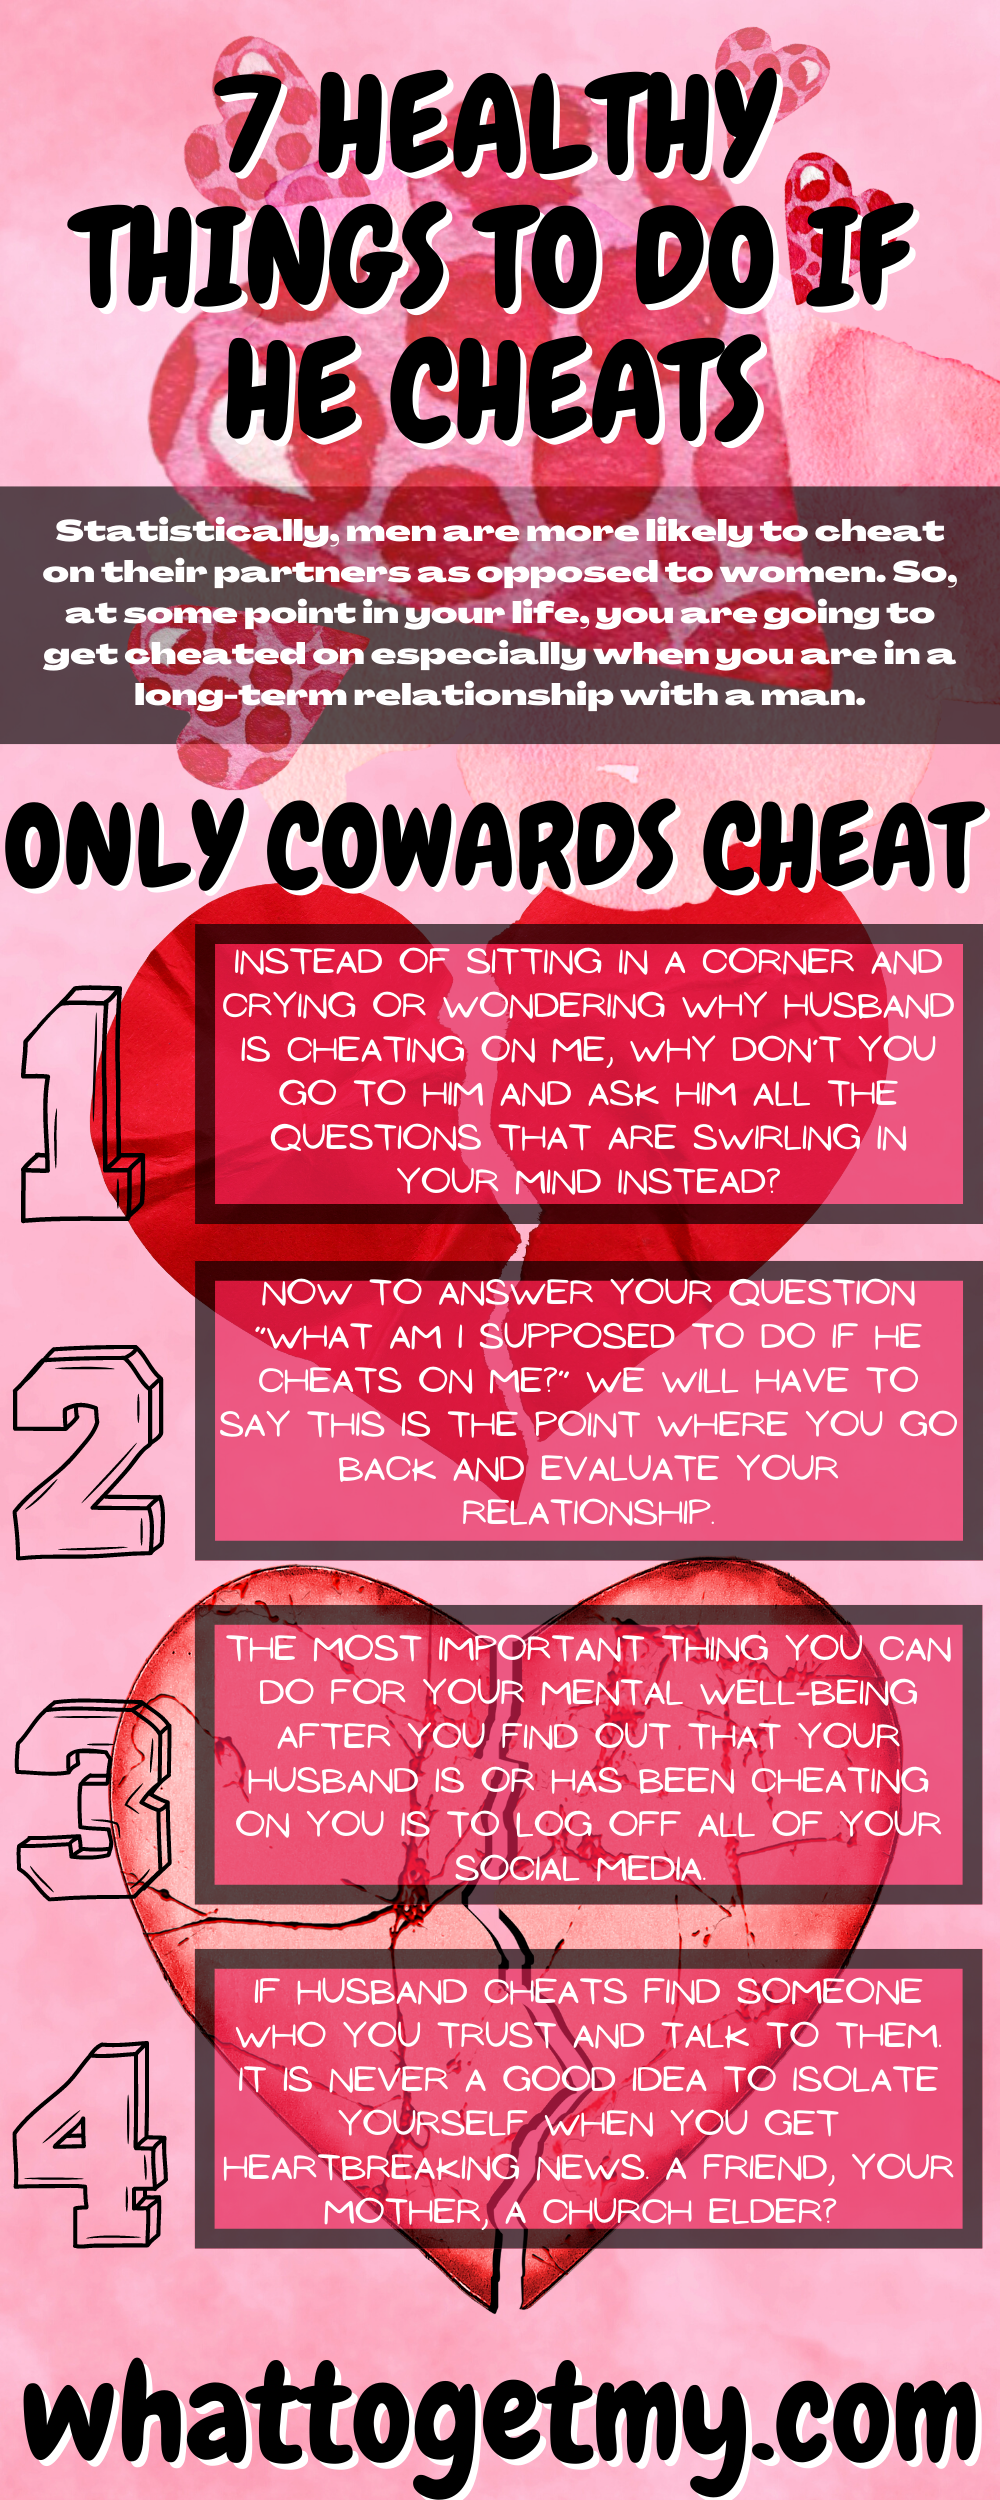 7 HEALTHY THINGS TO DO IF HE CHEATS